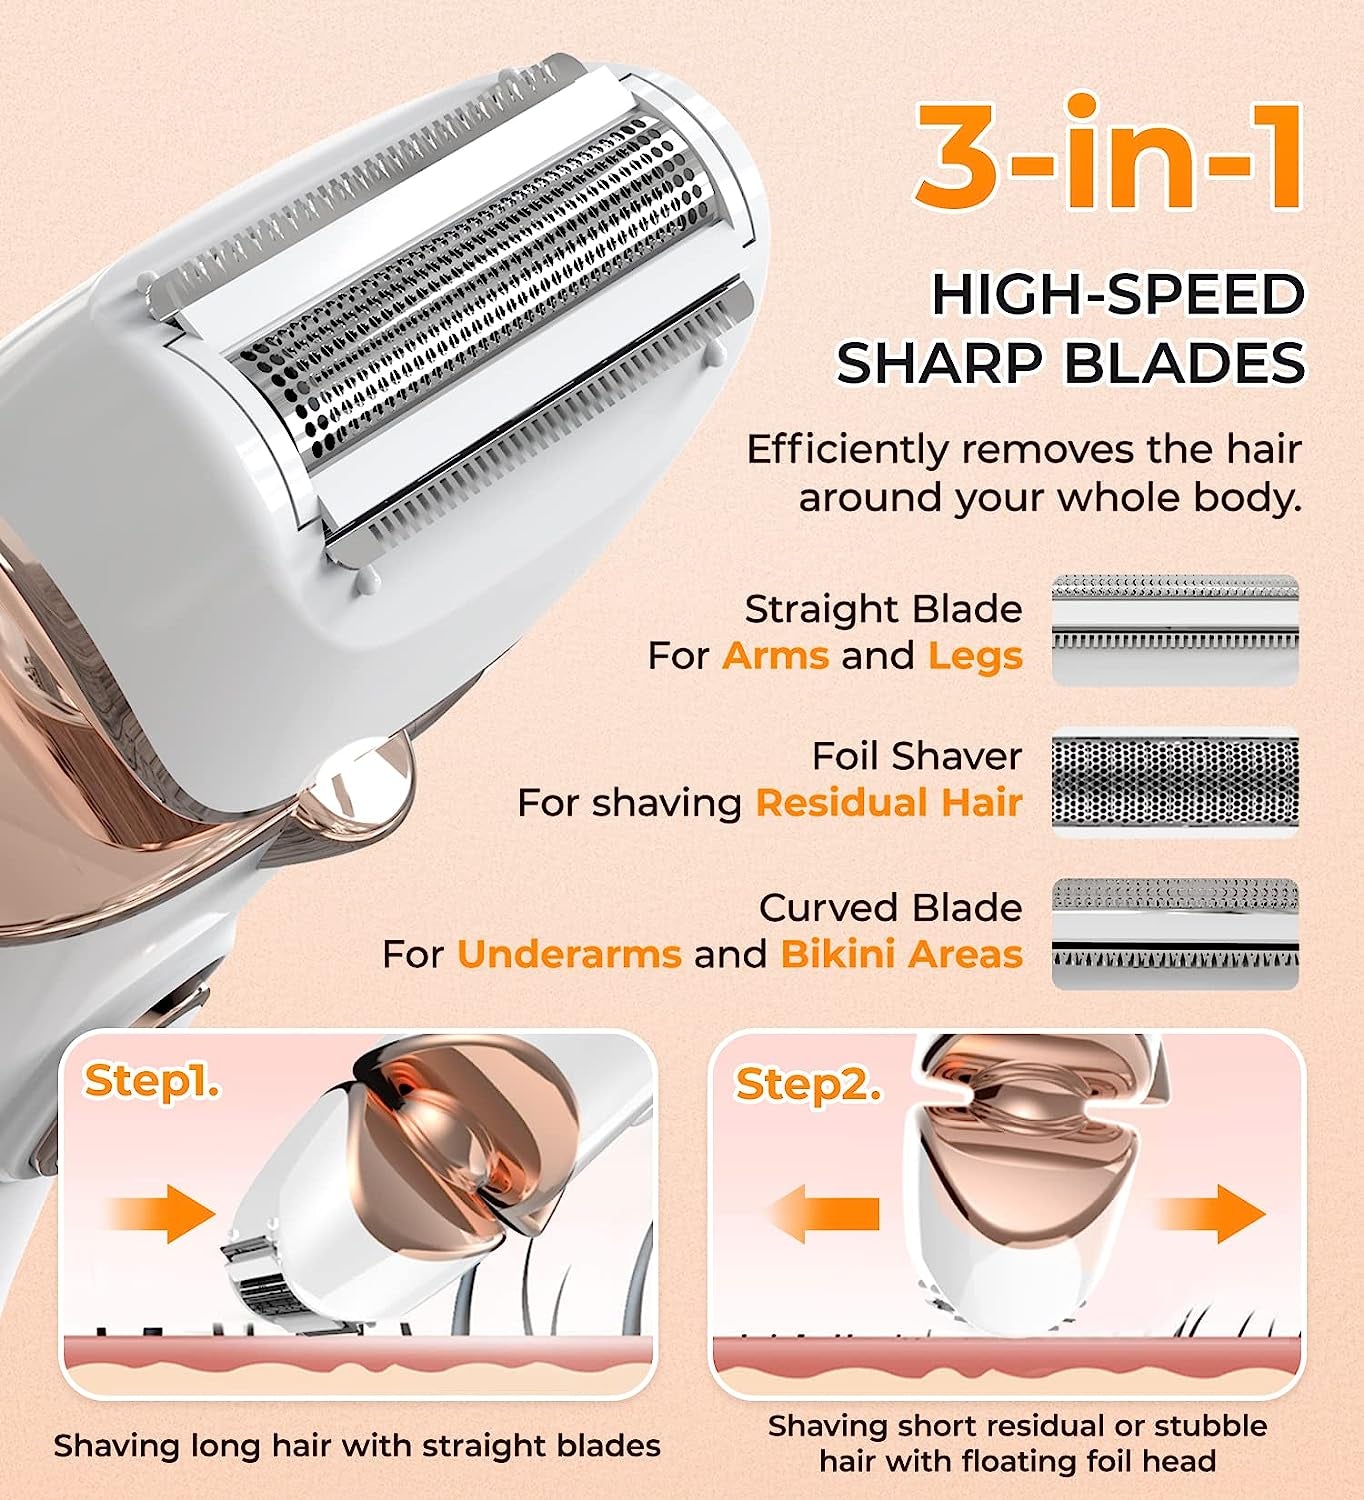 Electric Shaver for Women,Ladies Shaver,Lady Razor for Legs,Arm,Underarm,Bikini,Usb Rechargeable Razor Wet&Dry Cordless for Woman by PRITECH